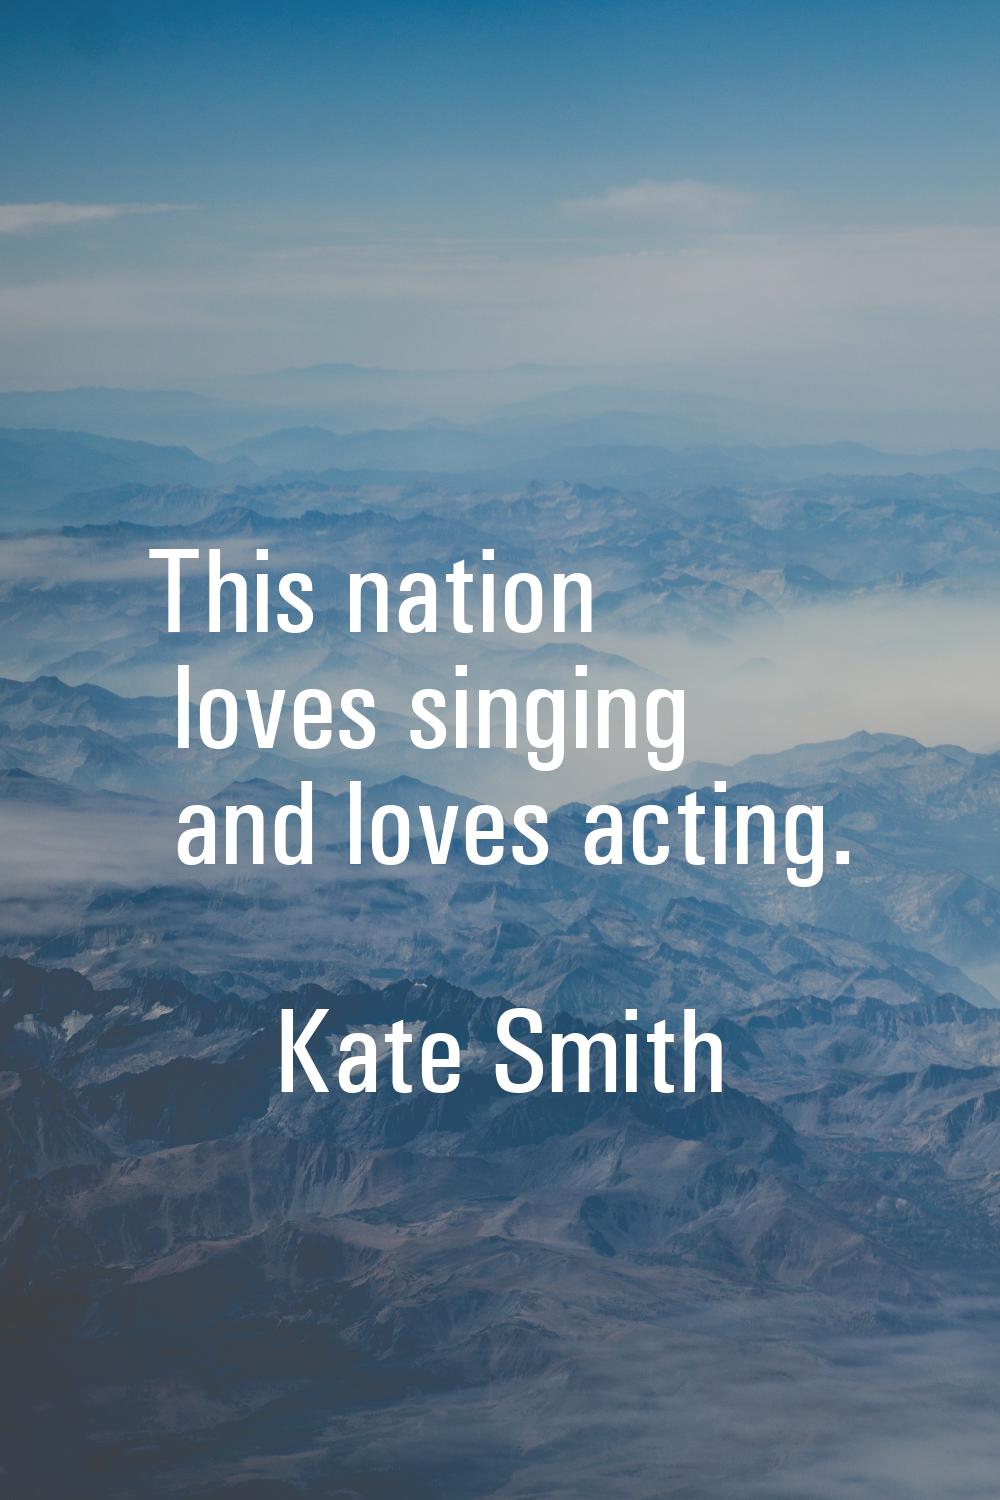 This nation loves singing and loves acting.